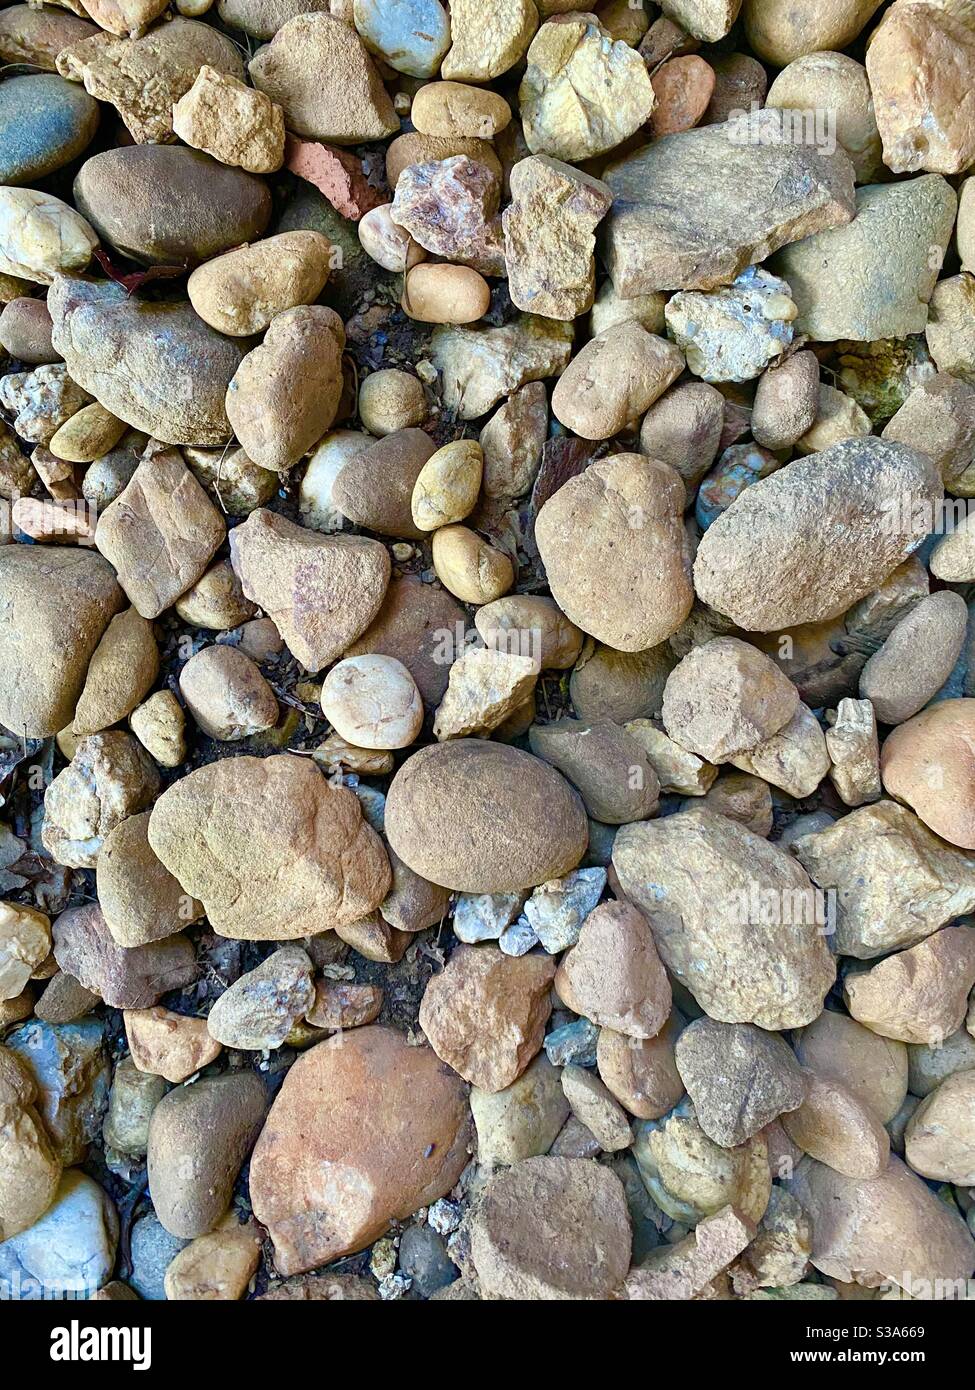 Bunch of rocks, stones and pebbles Stock Photo